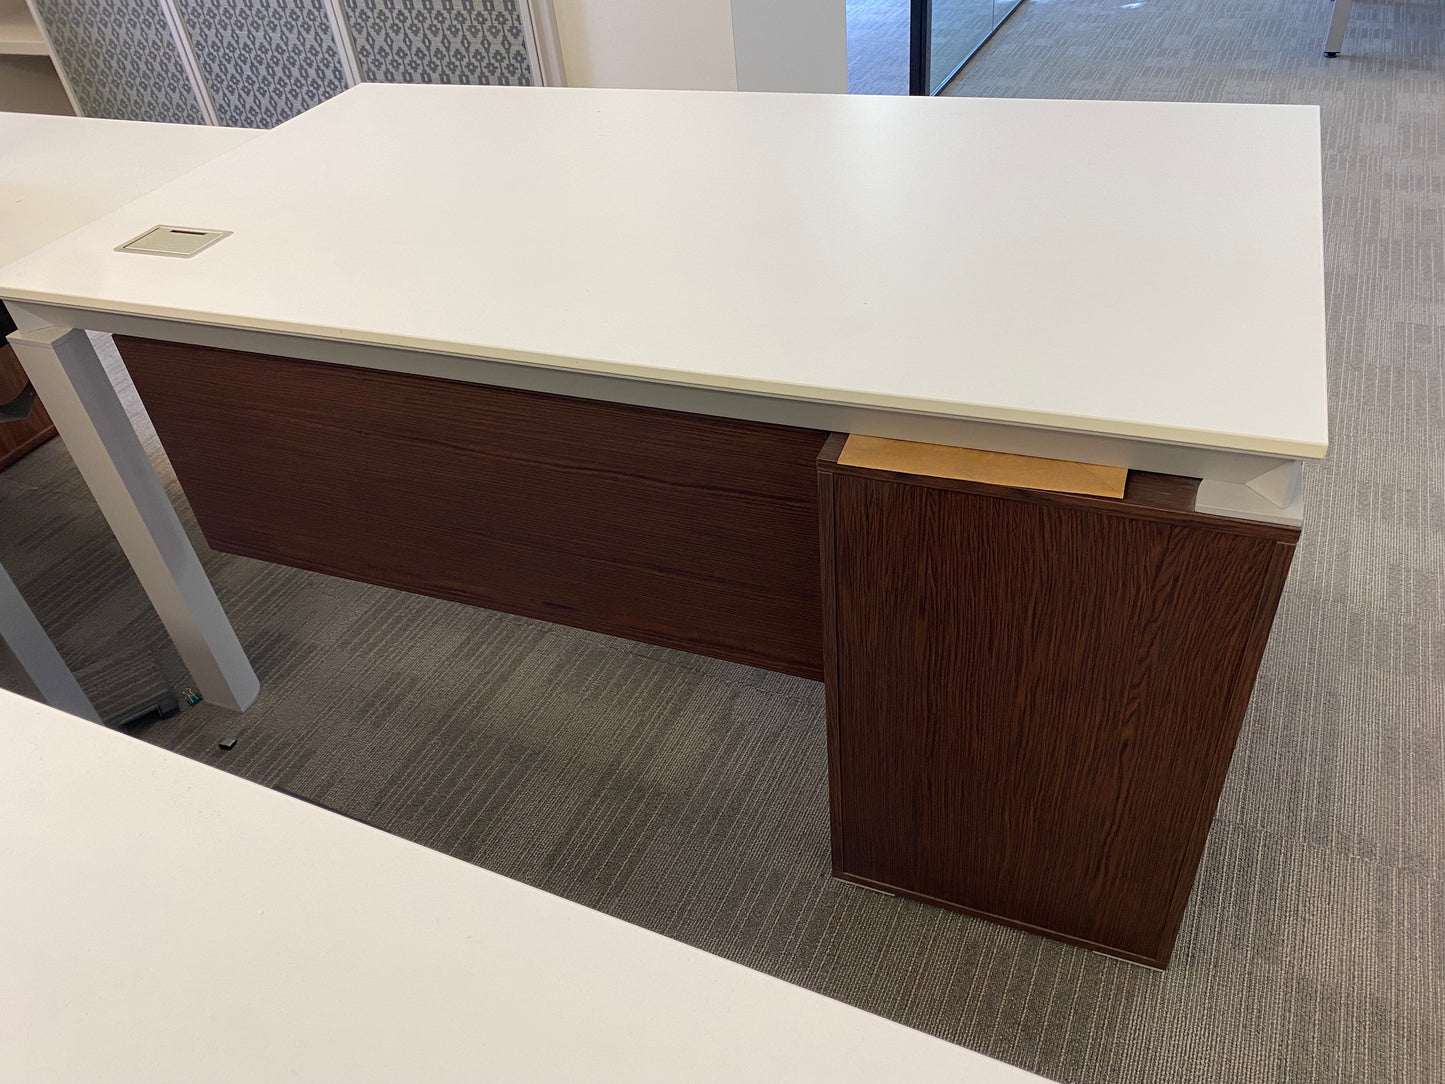 Executive office table with walnut modesty panel and drawers